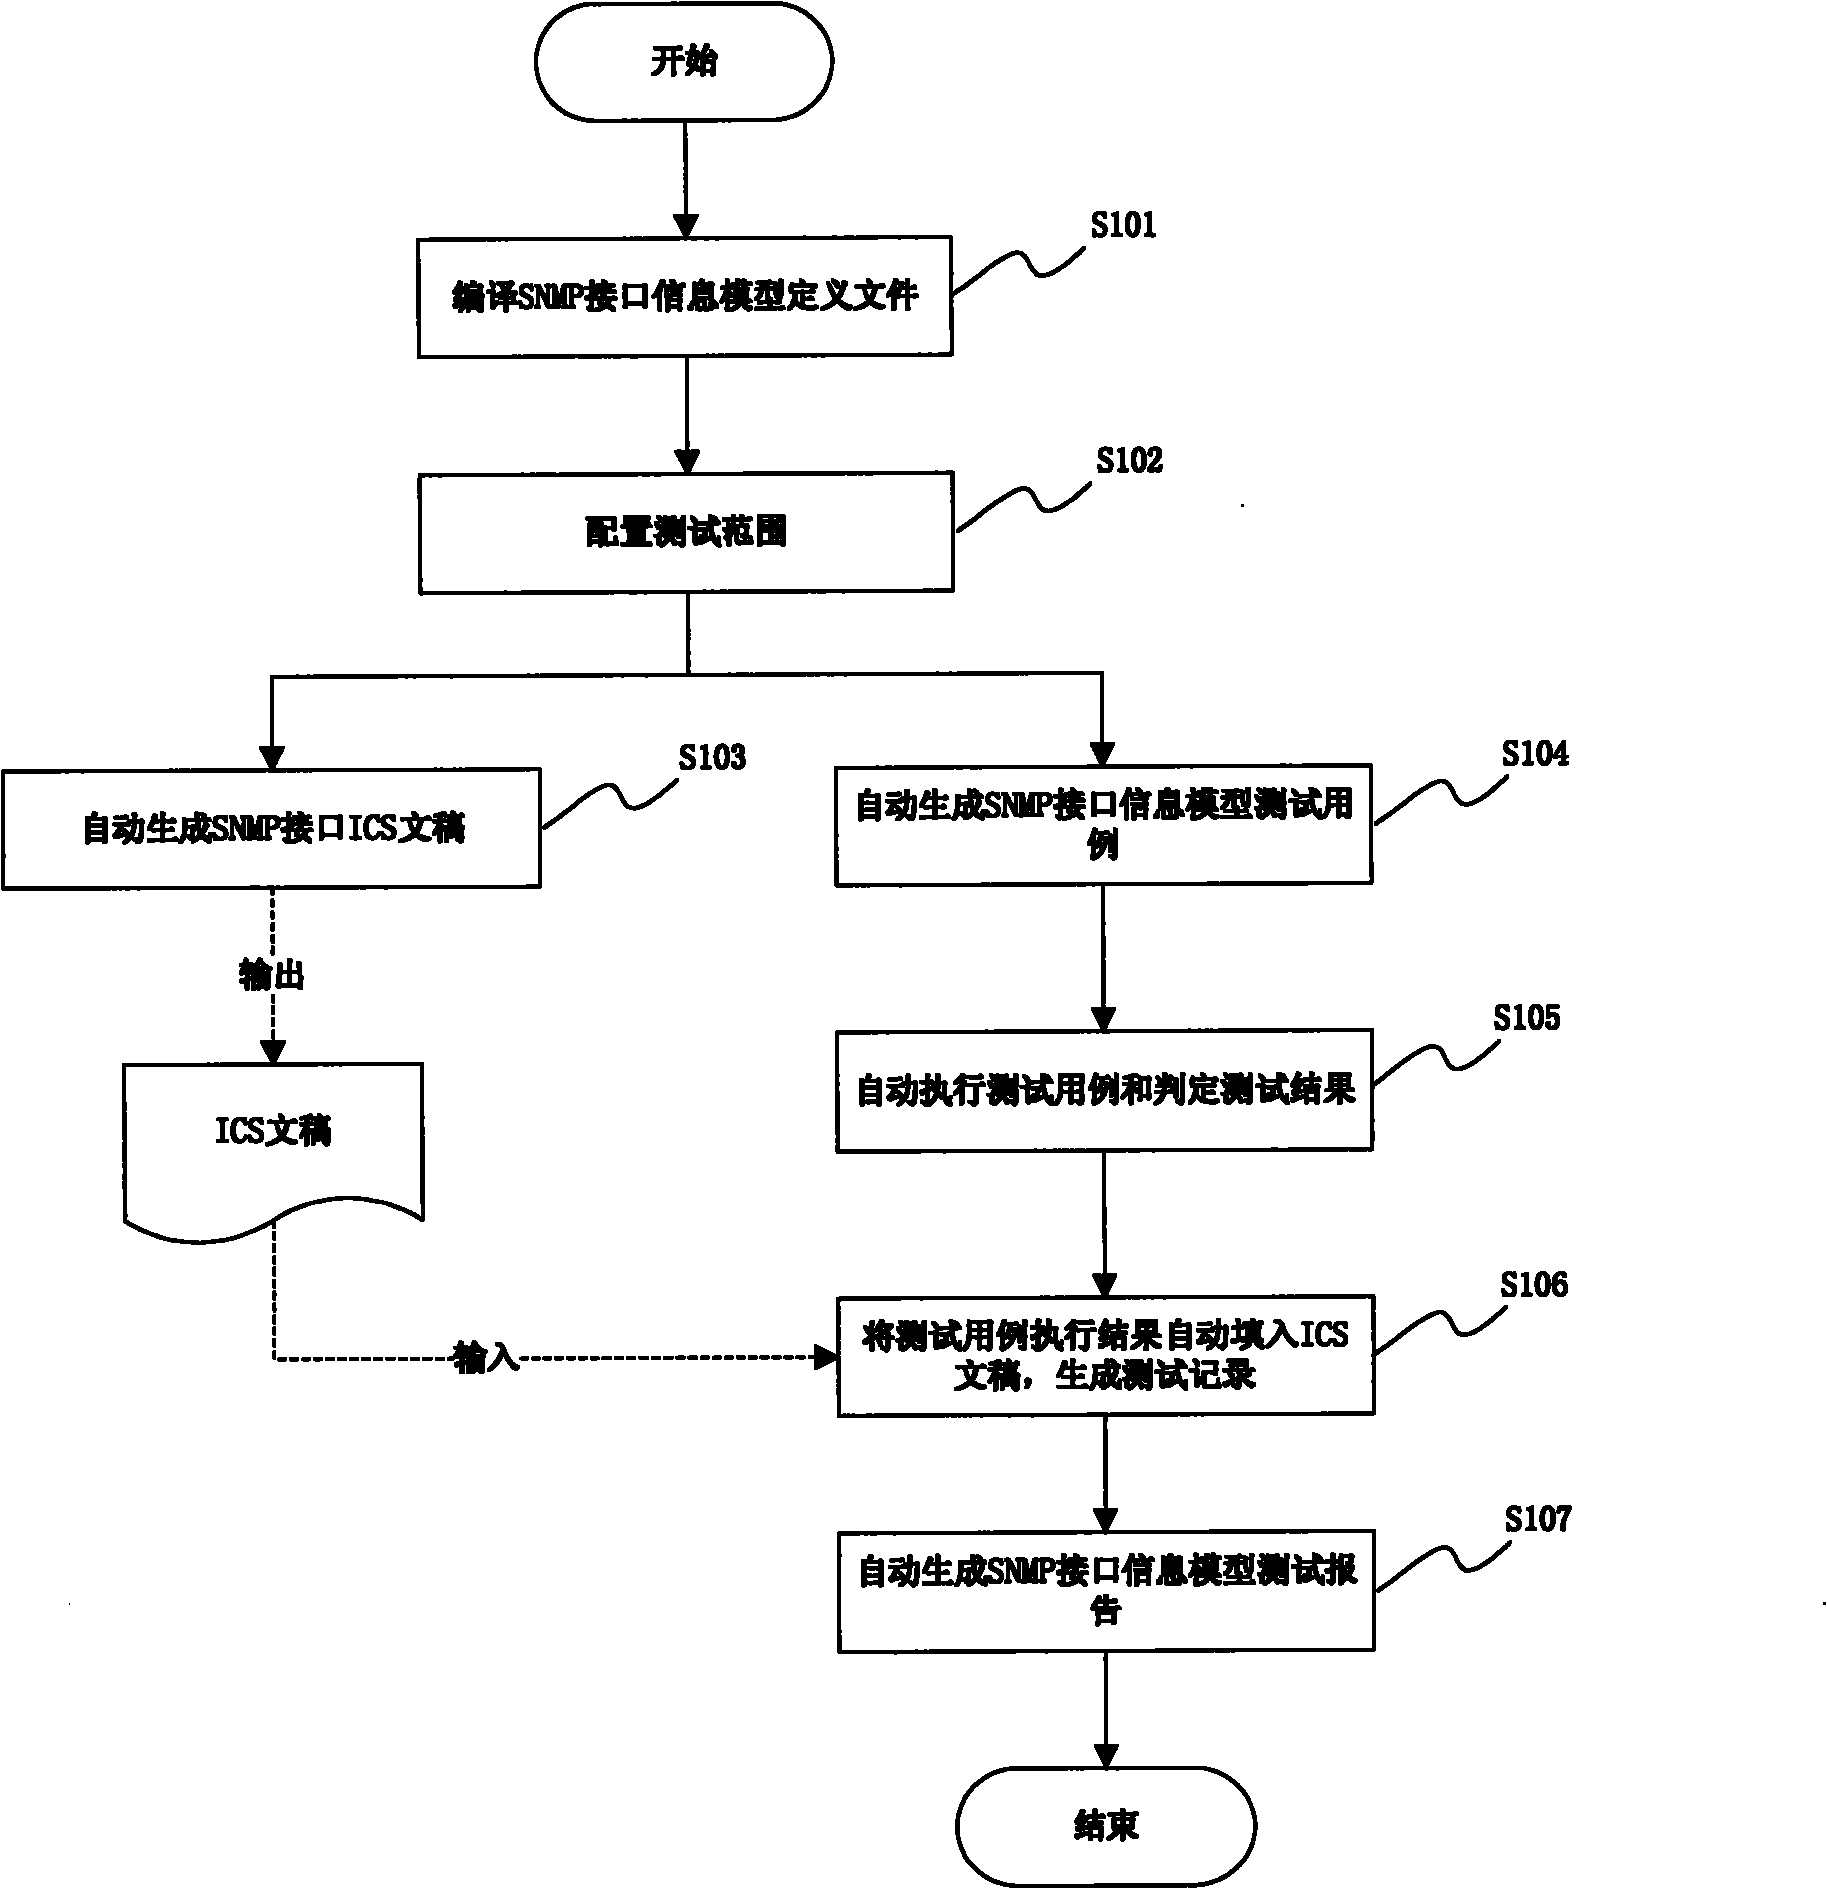 Method and system for automatically testing consistence of SNMP (Simple Network Management Protocol) interface information model